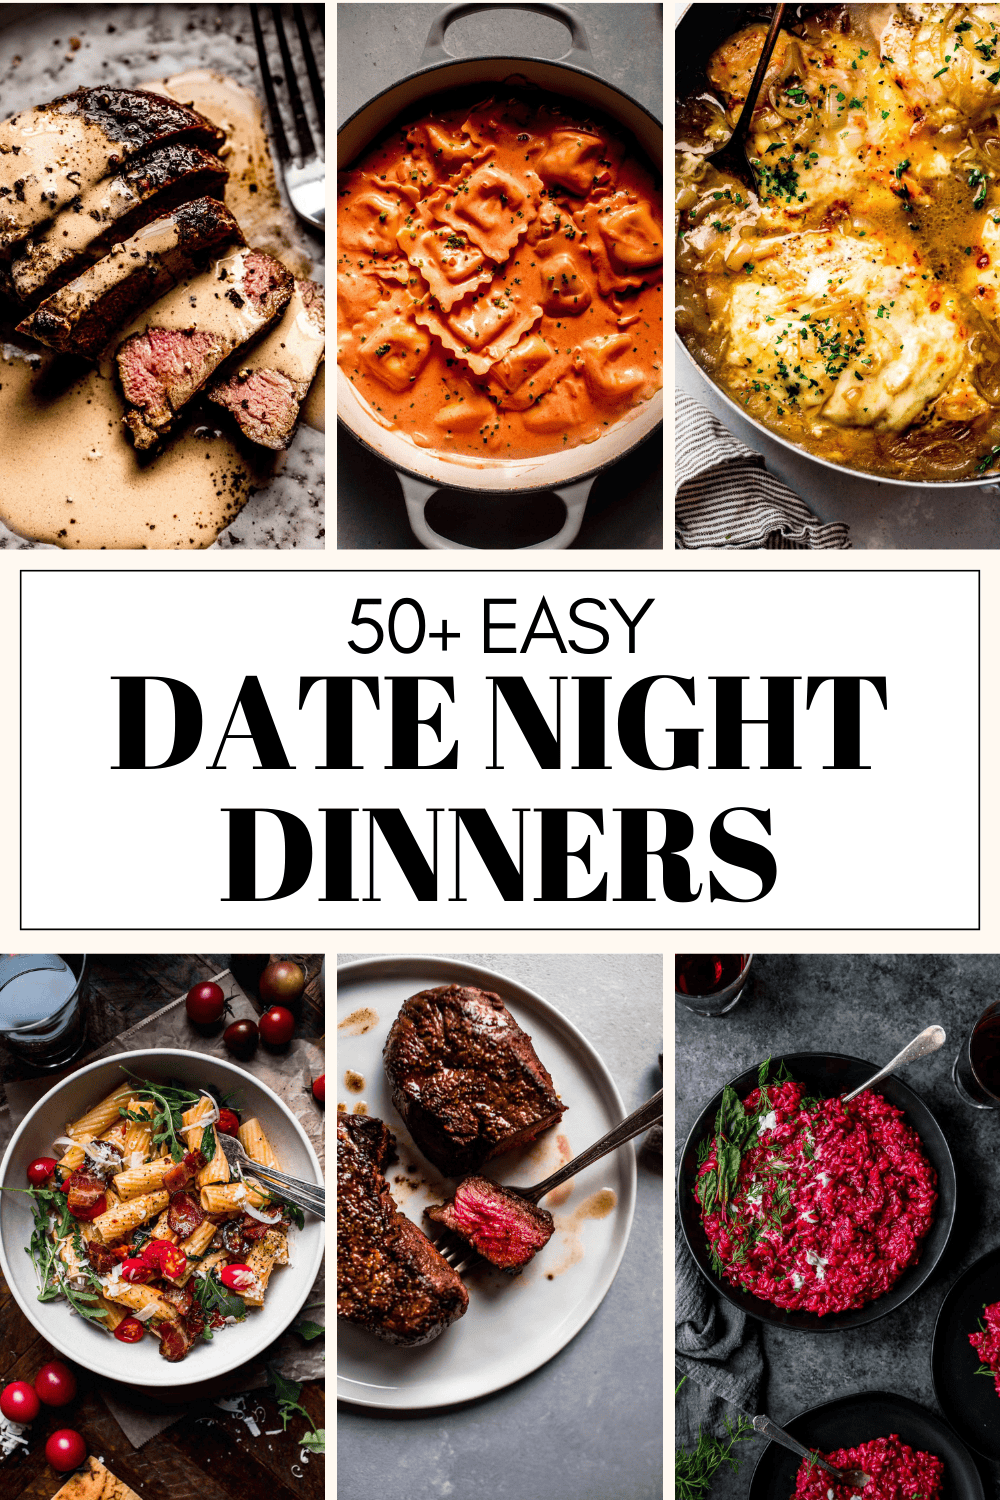 Collage of date night dinner ideas with text overlay.